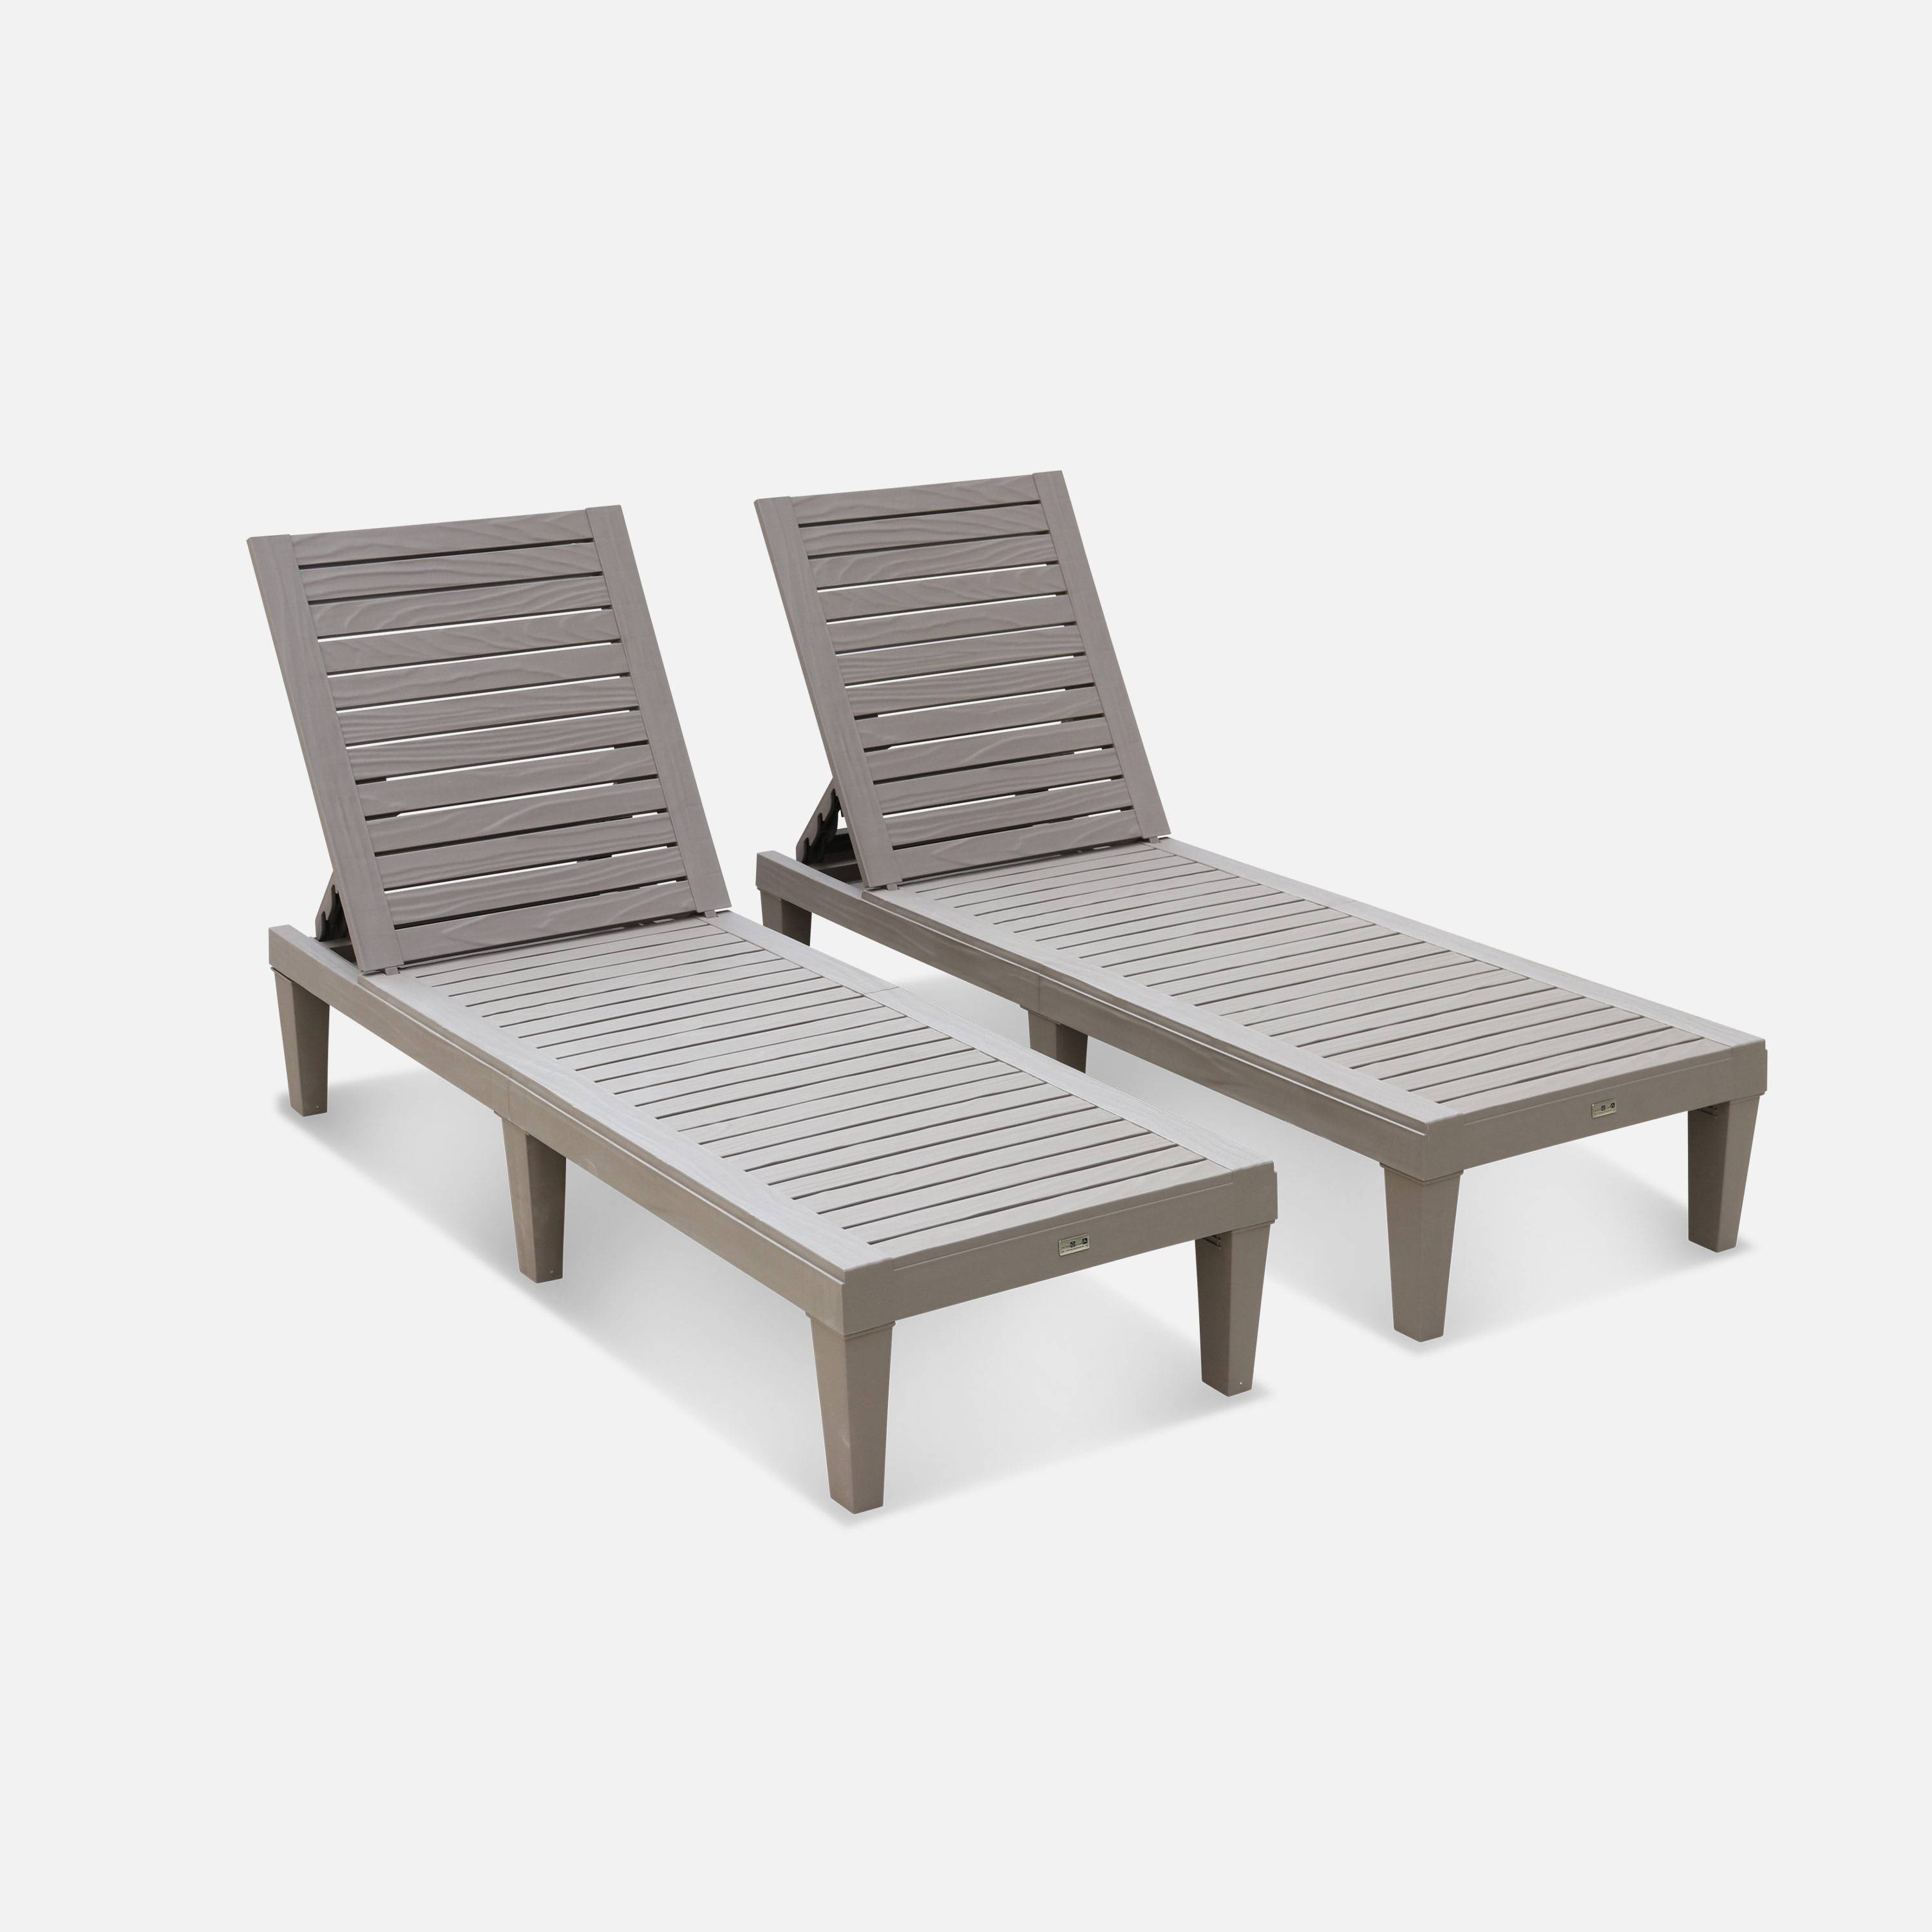 Pair of plastic loungers, multi position sun beds with textured wood effect - Pia - Grey,sweeek,Photo2